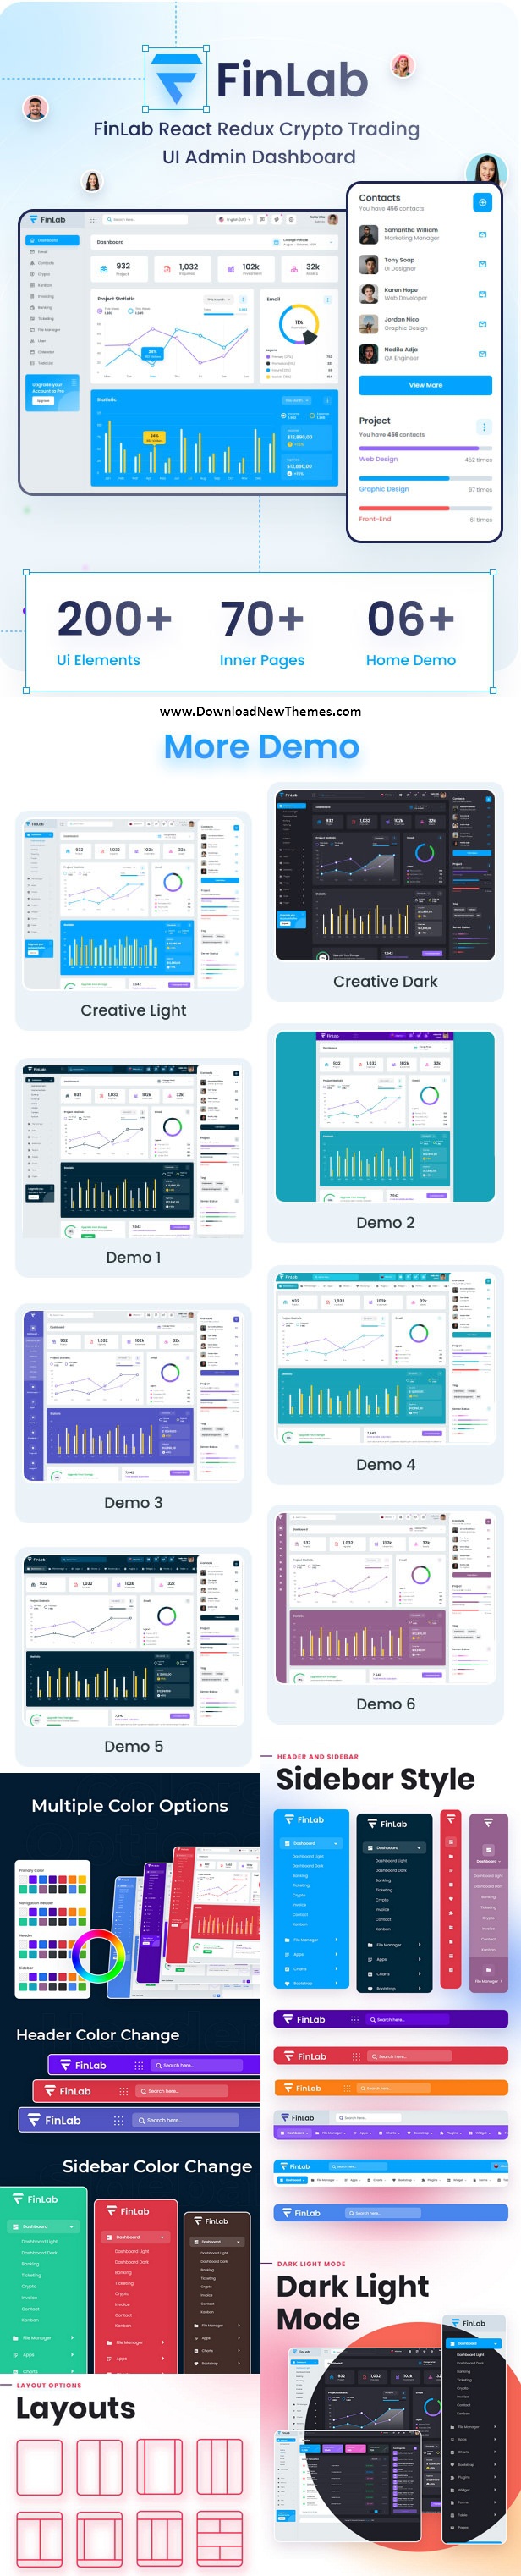 FinLab - React Redux Crypto Trading UI Admin Dashboard Template Review